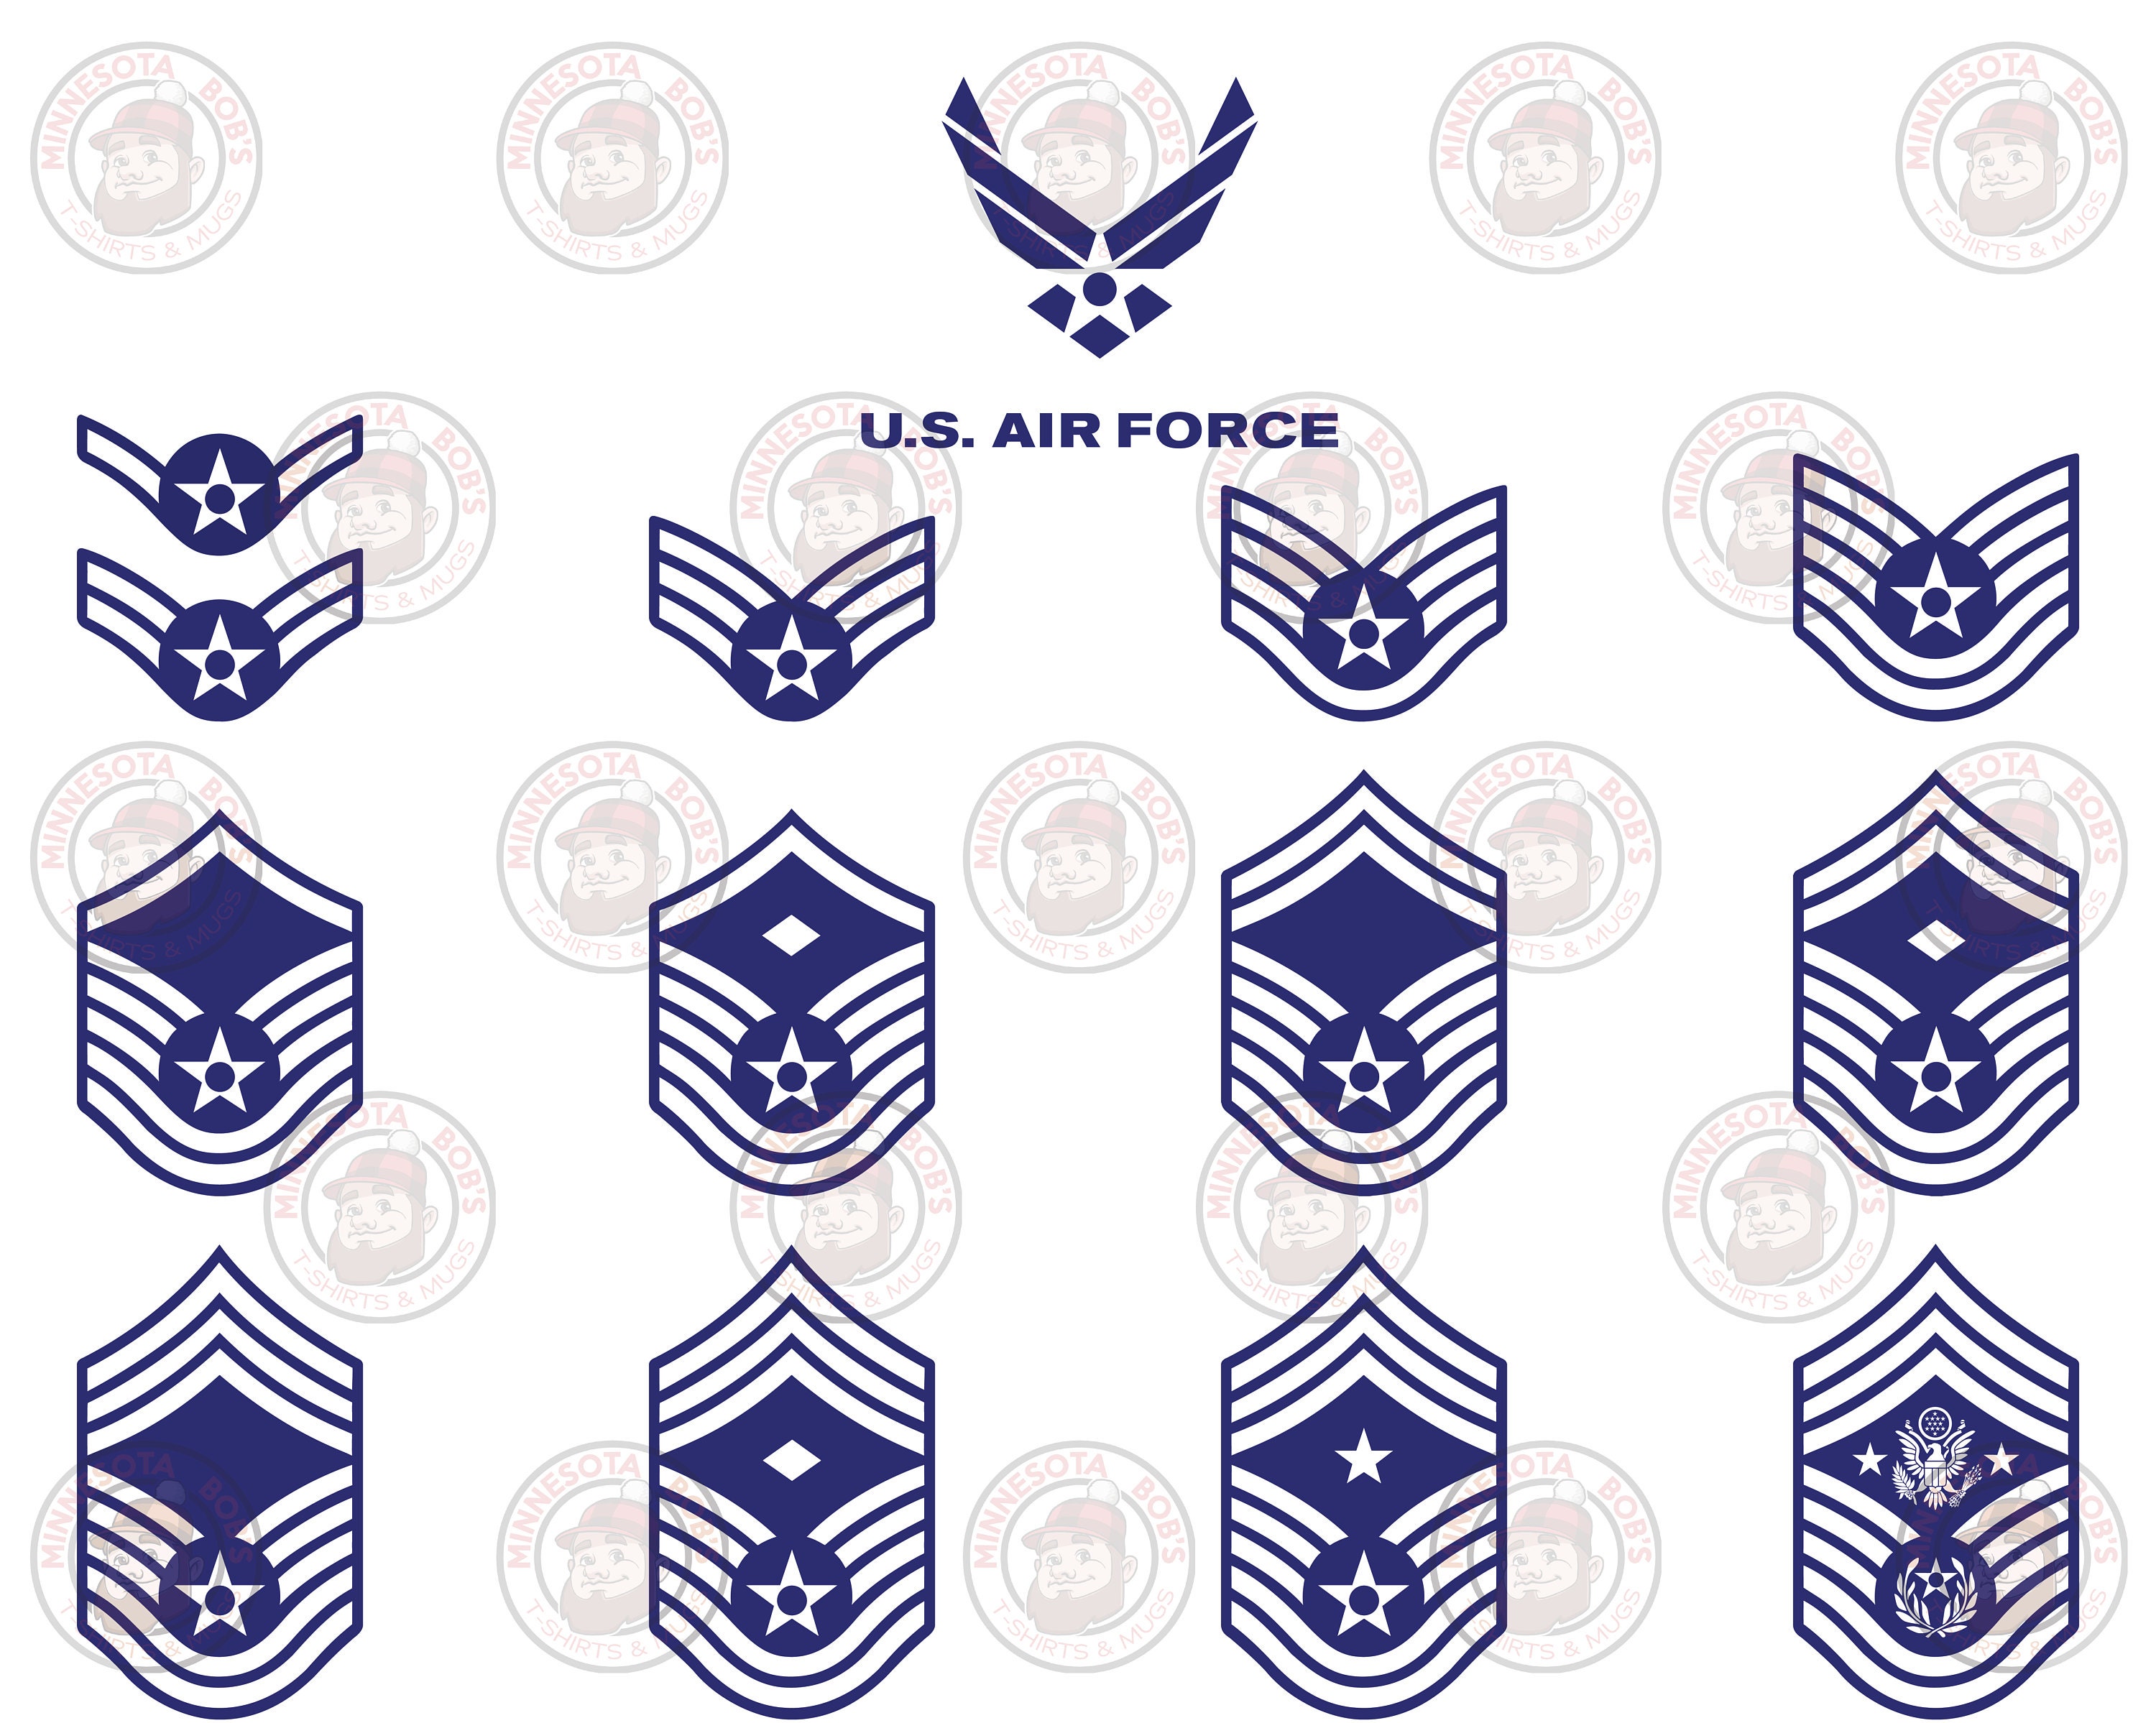 Air Force Rank Structure Enlisted | brebdude.com